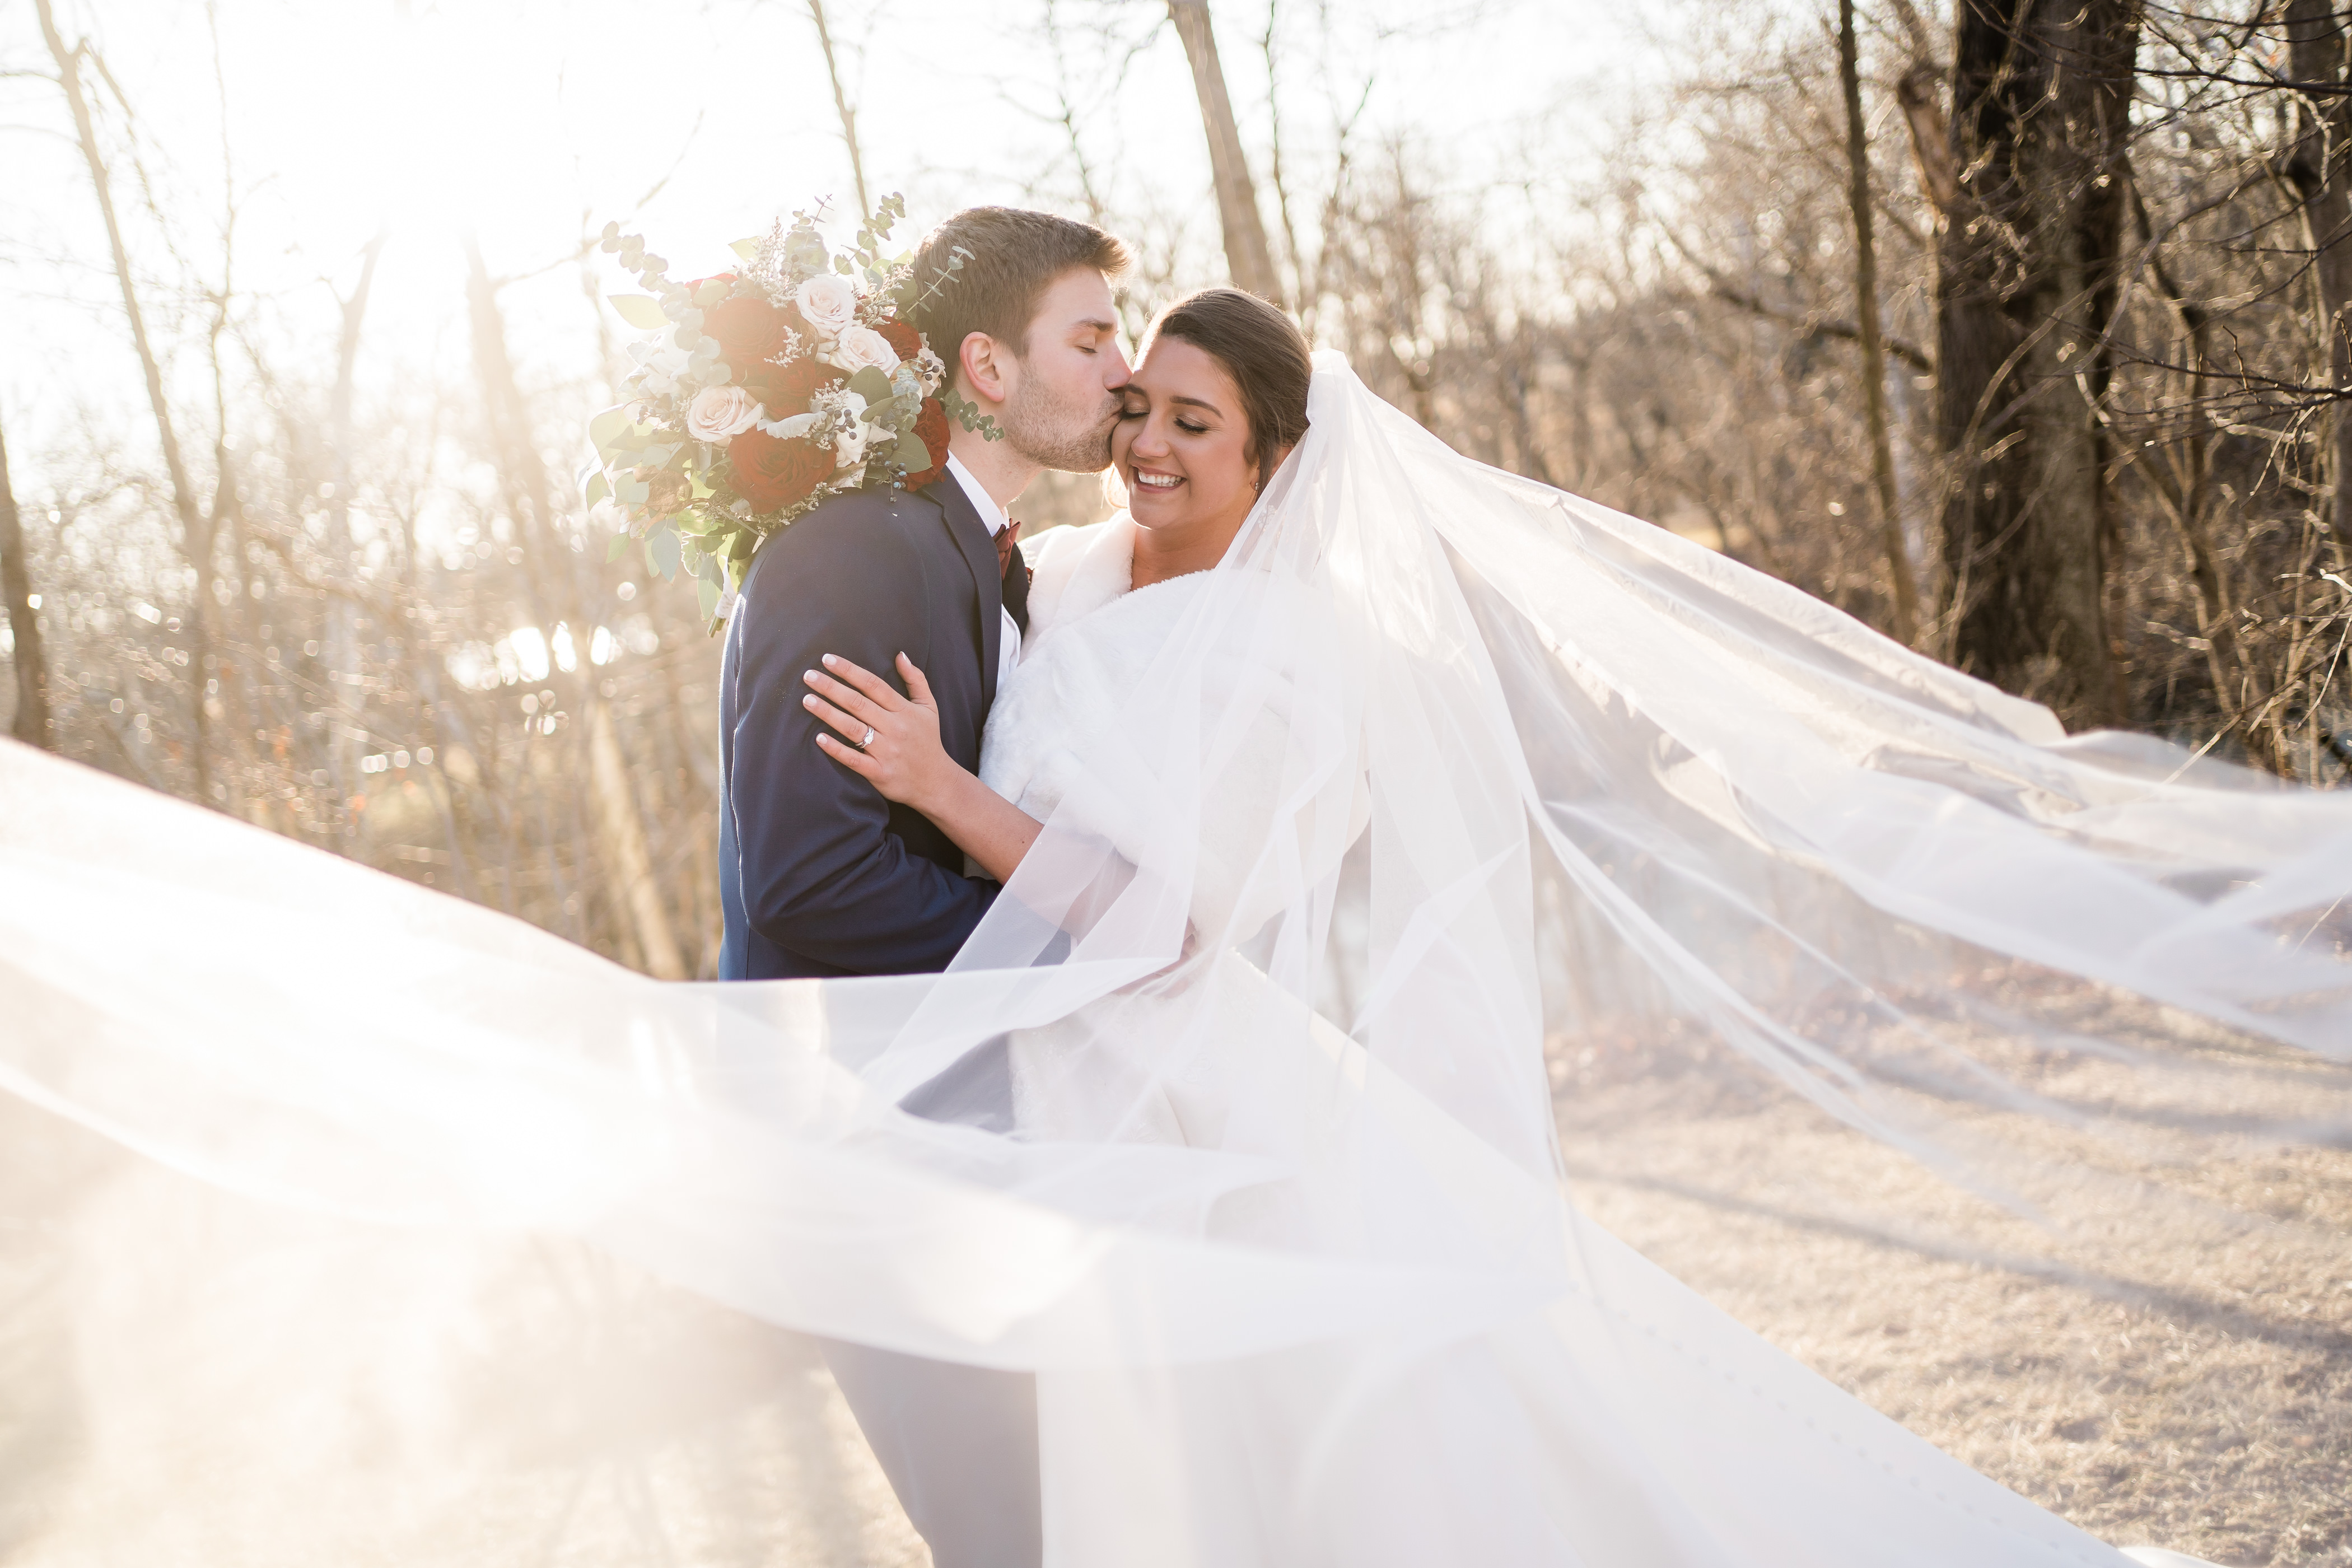 bridal portraits at sunset at The Bluffs at Conner Prairie wedding venue with brides veil in the wind as the groom kisses her cheek